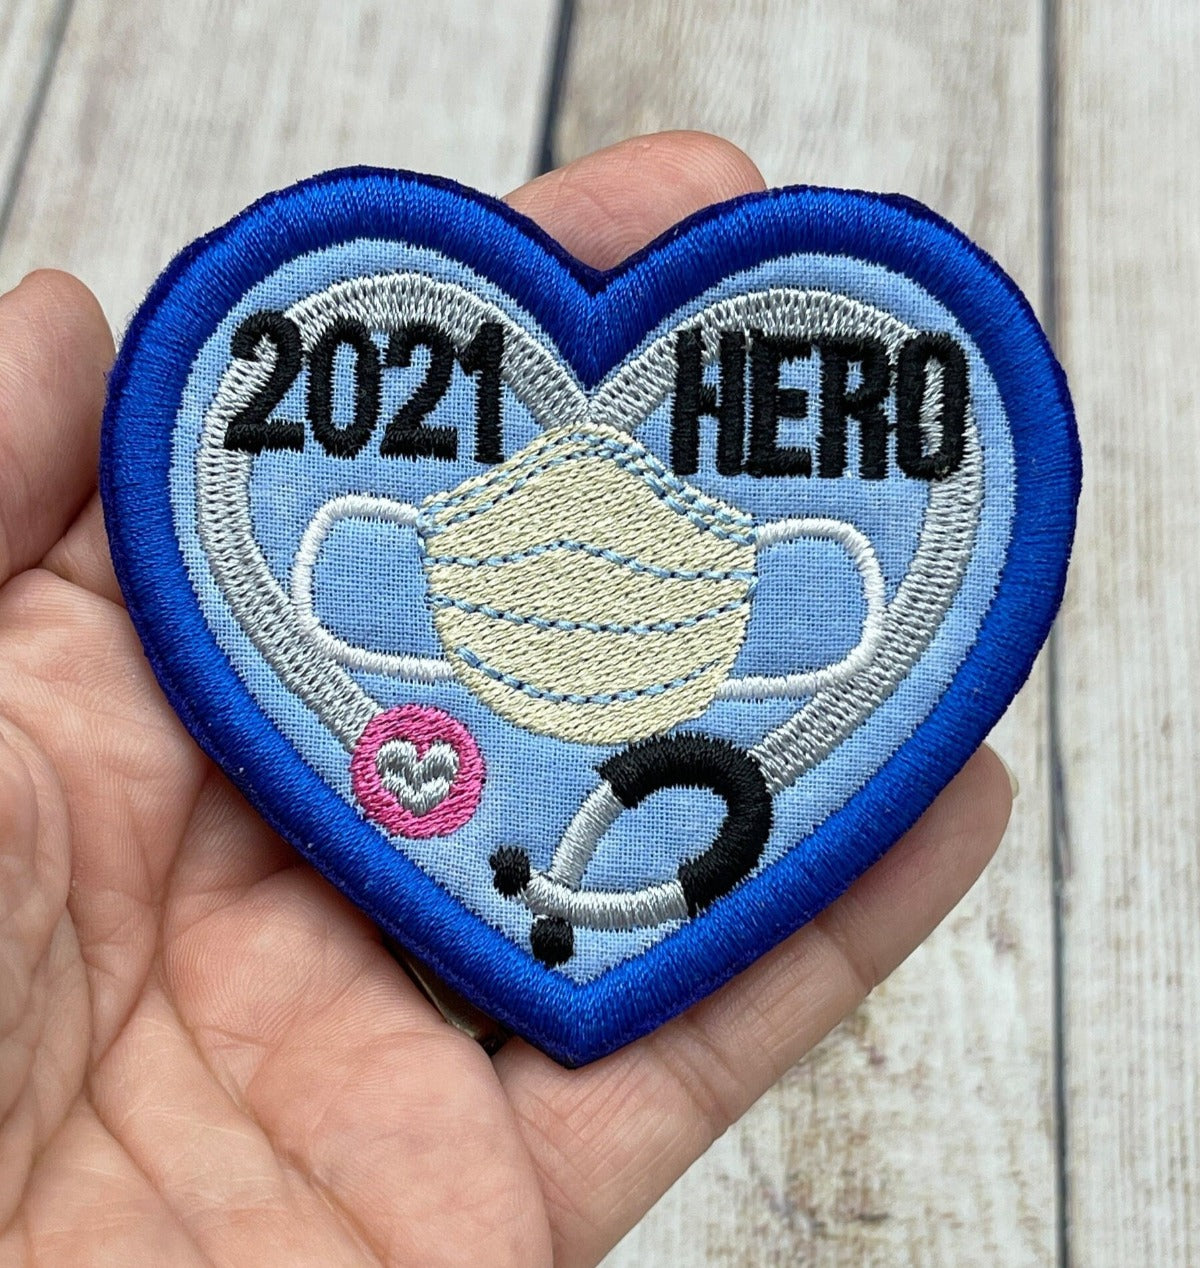 Healthcare Hero 2021 heart patch for scrubs, jacket, or hat.